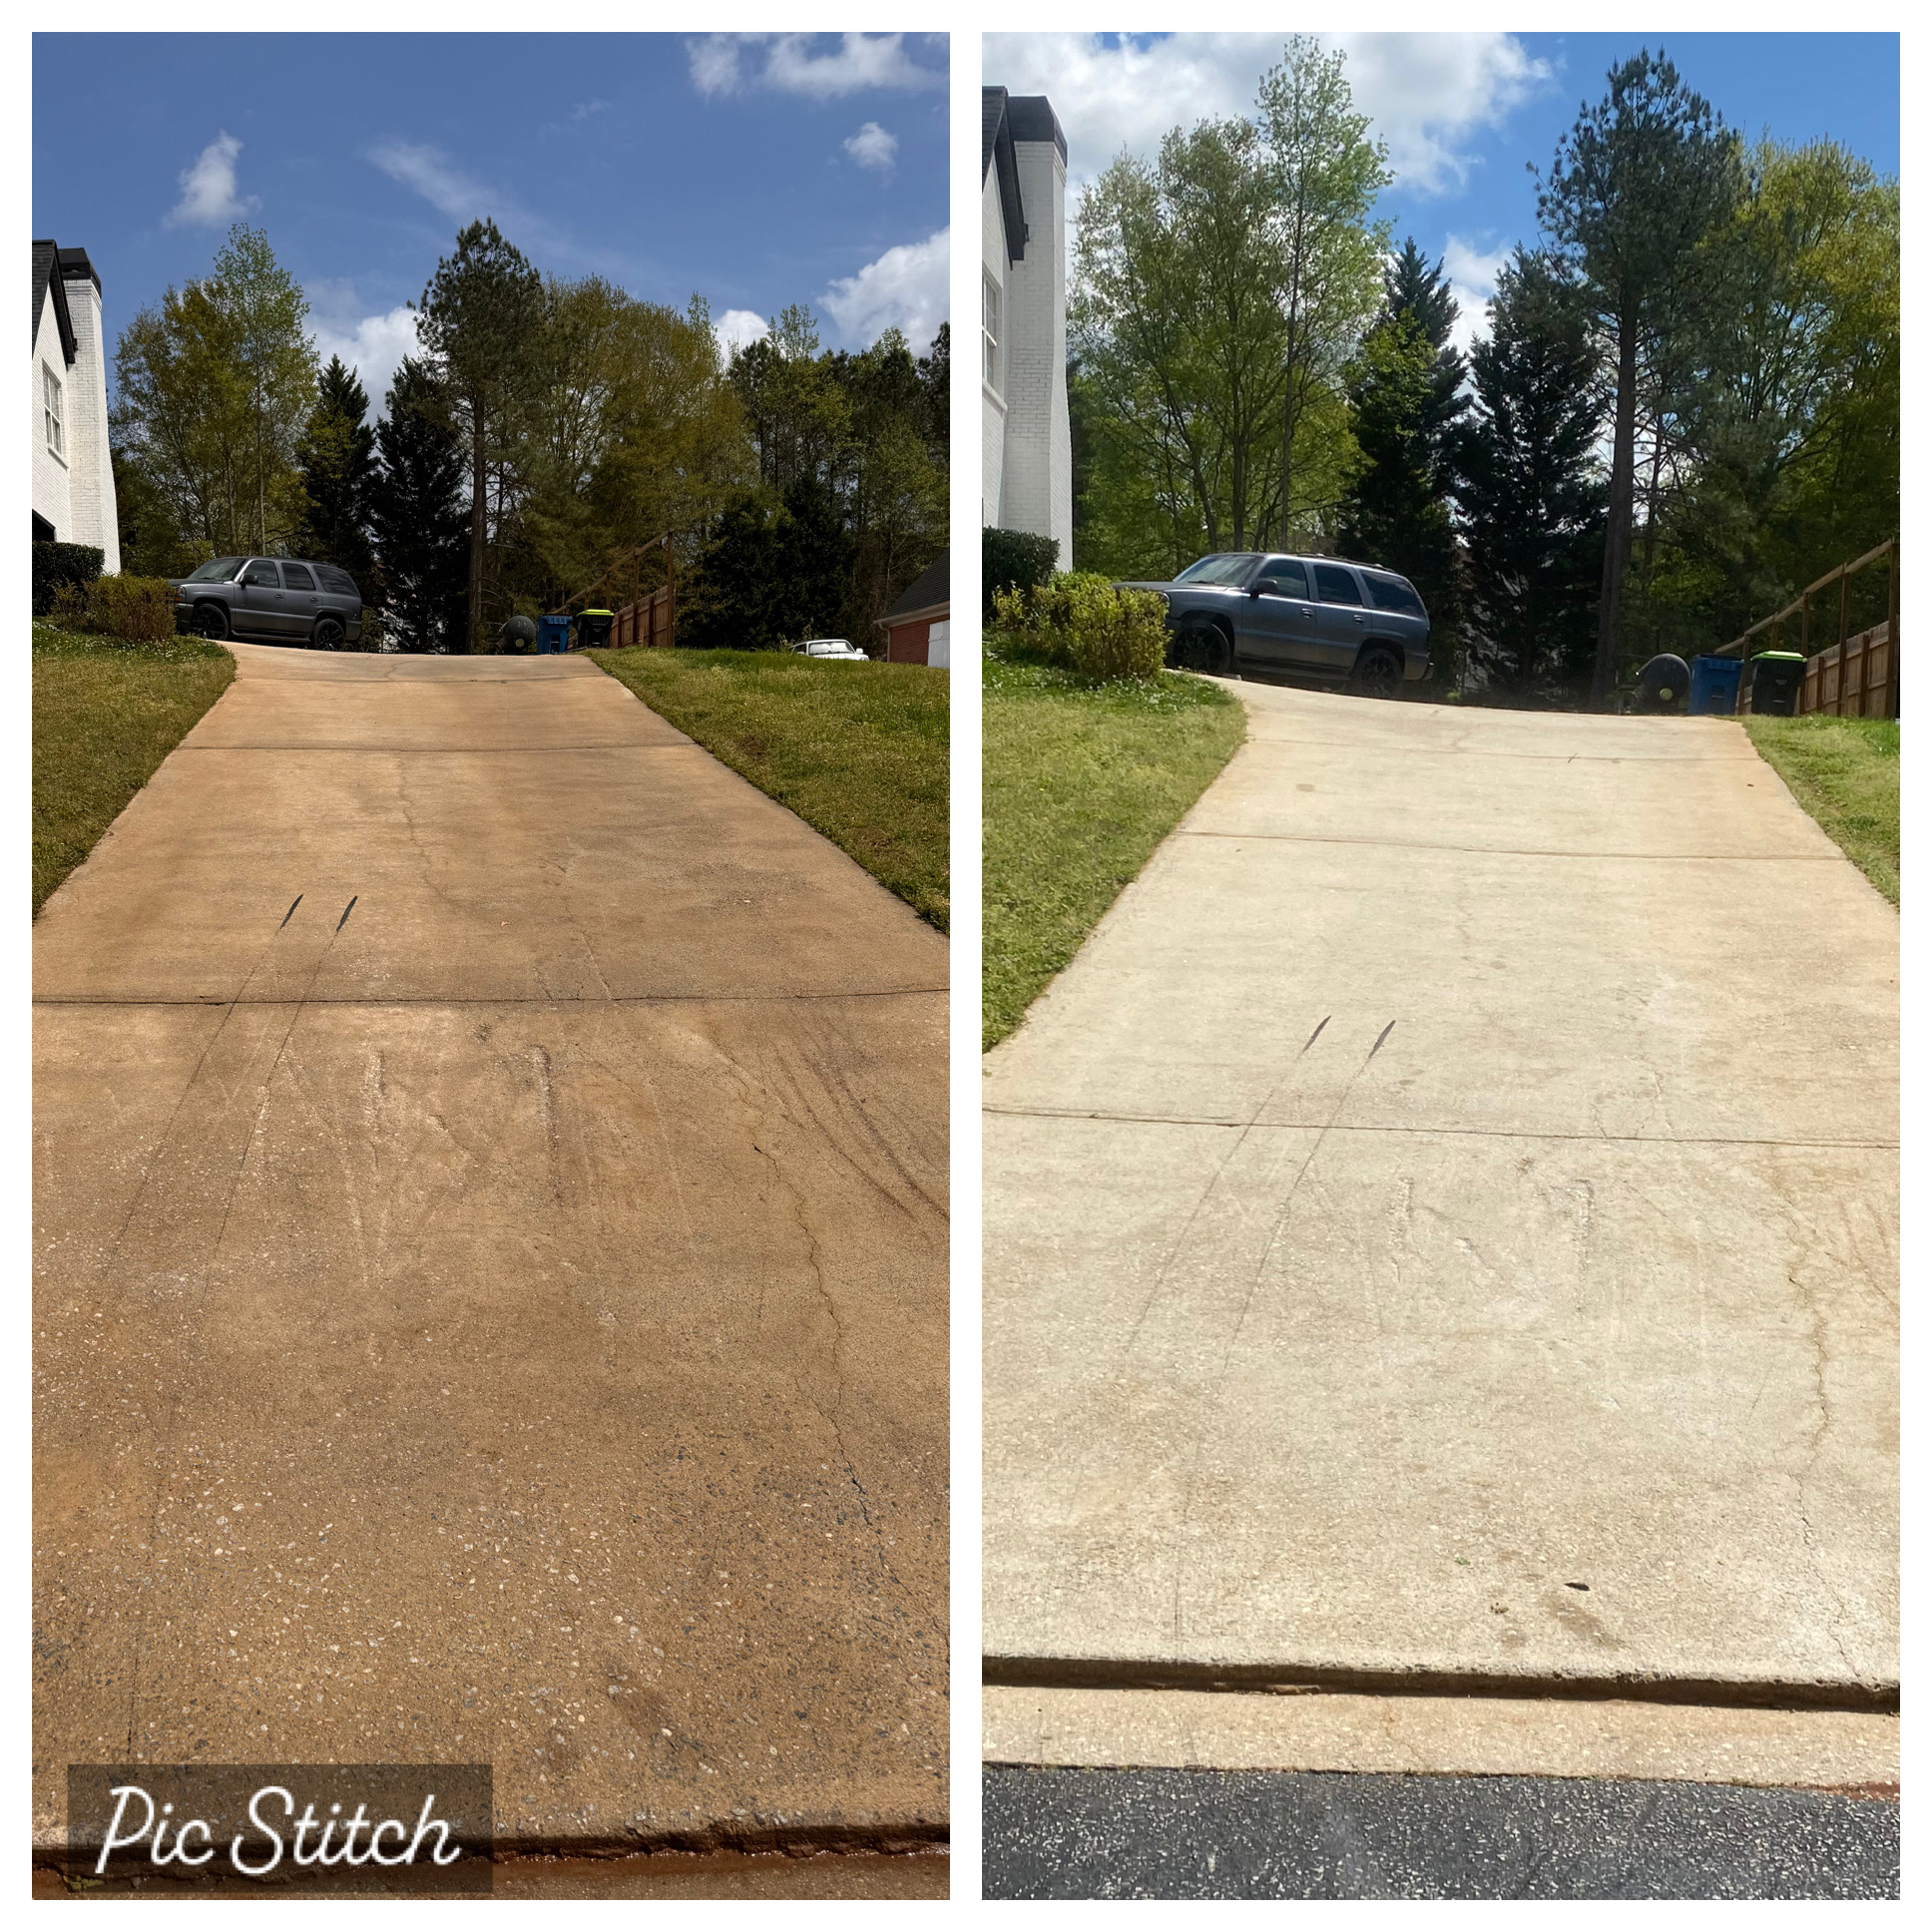 Free Wash Wednesday - Driveway Cleaning